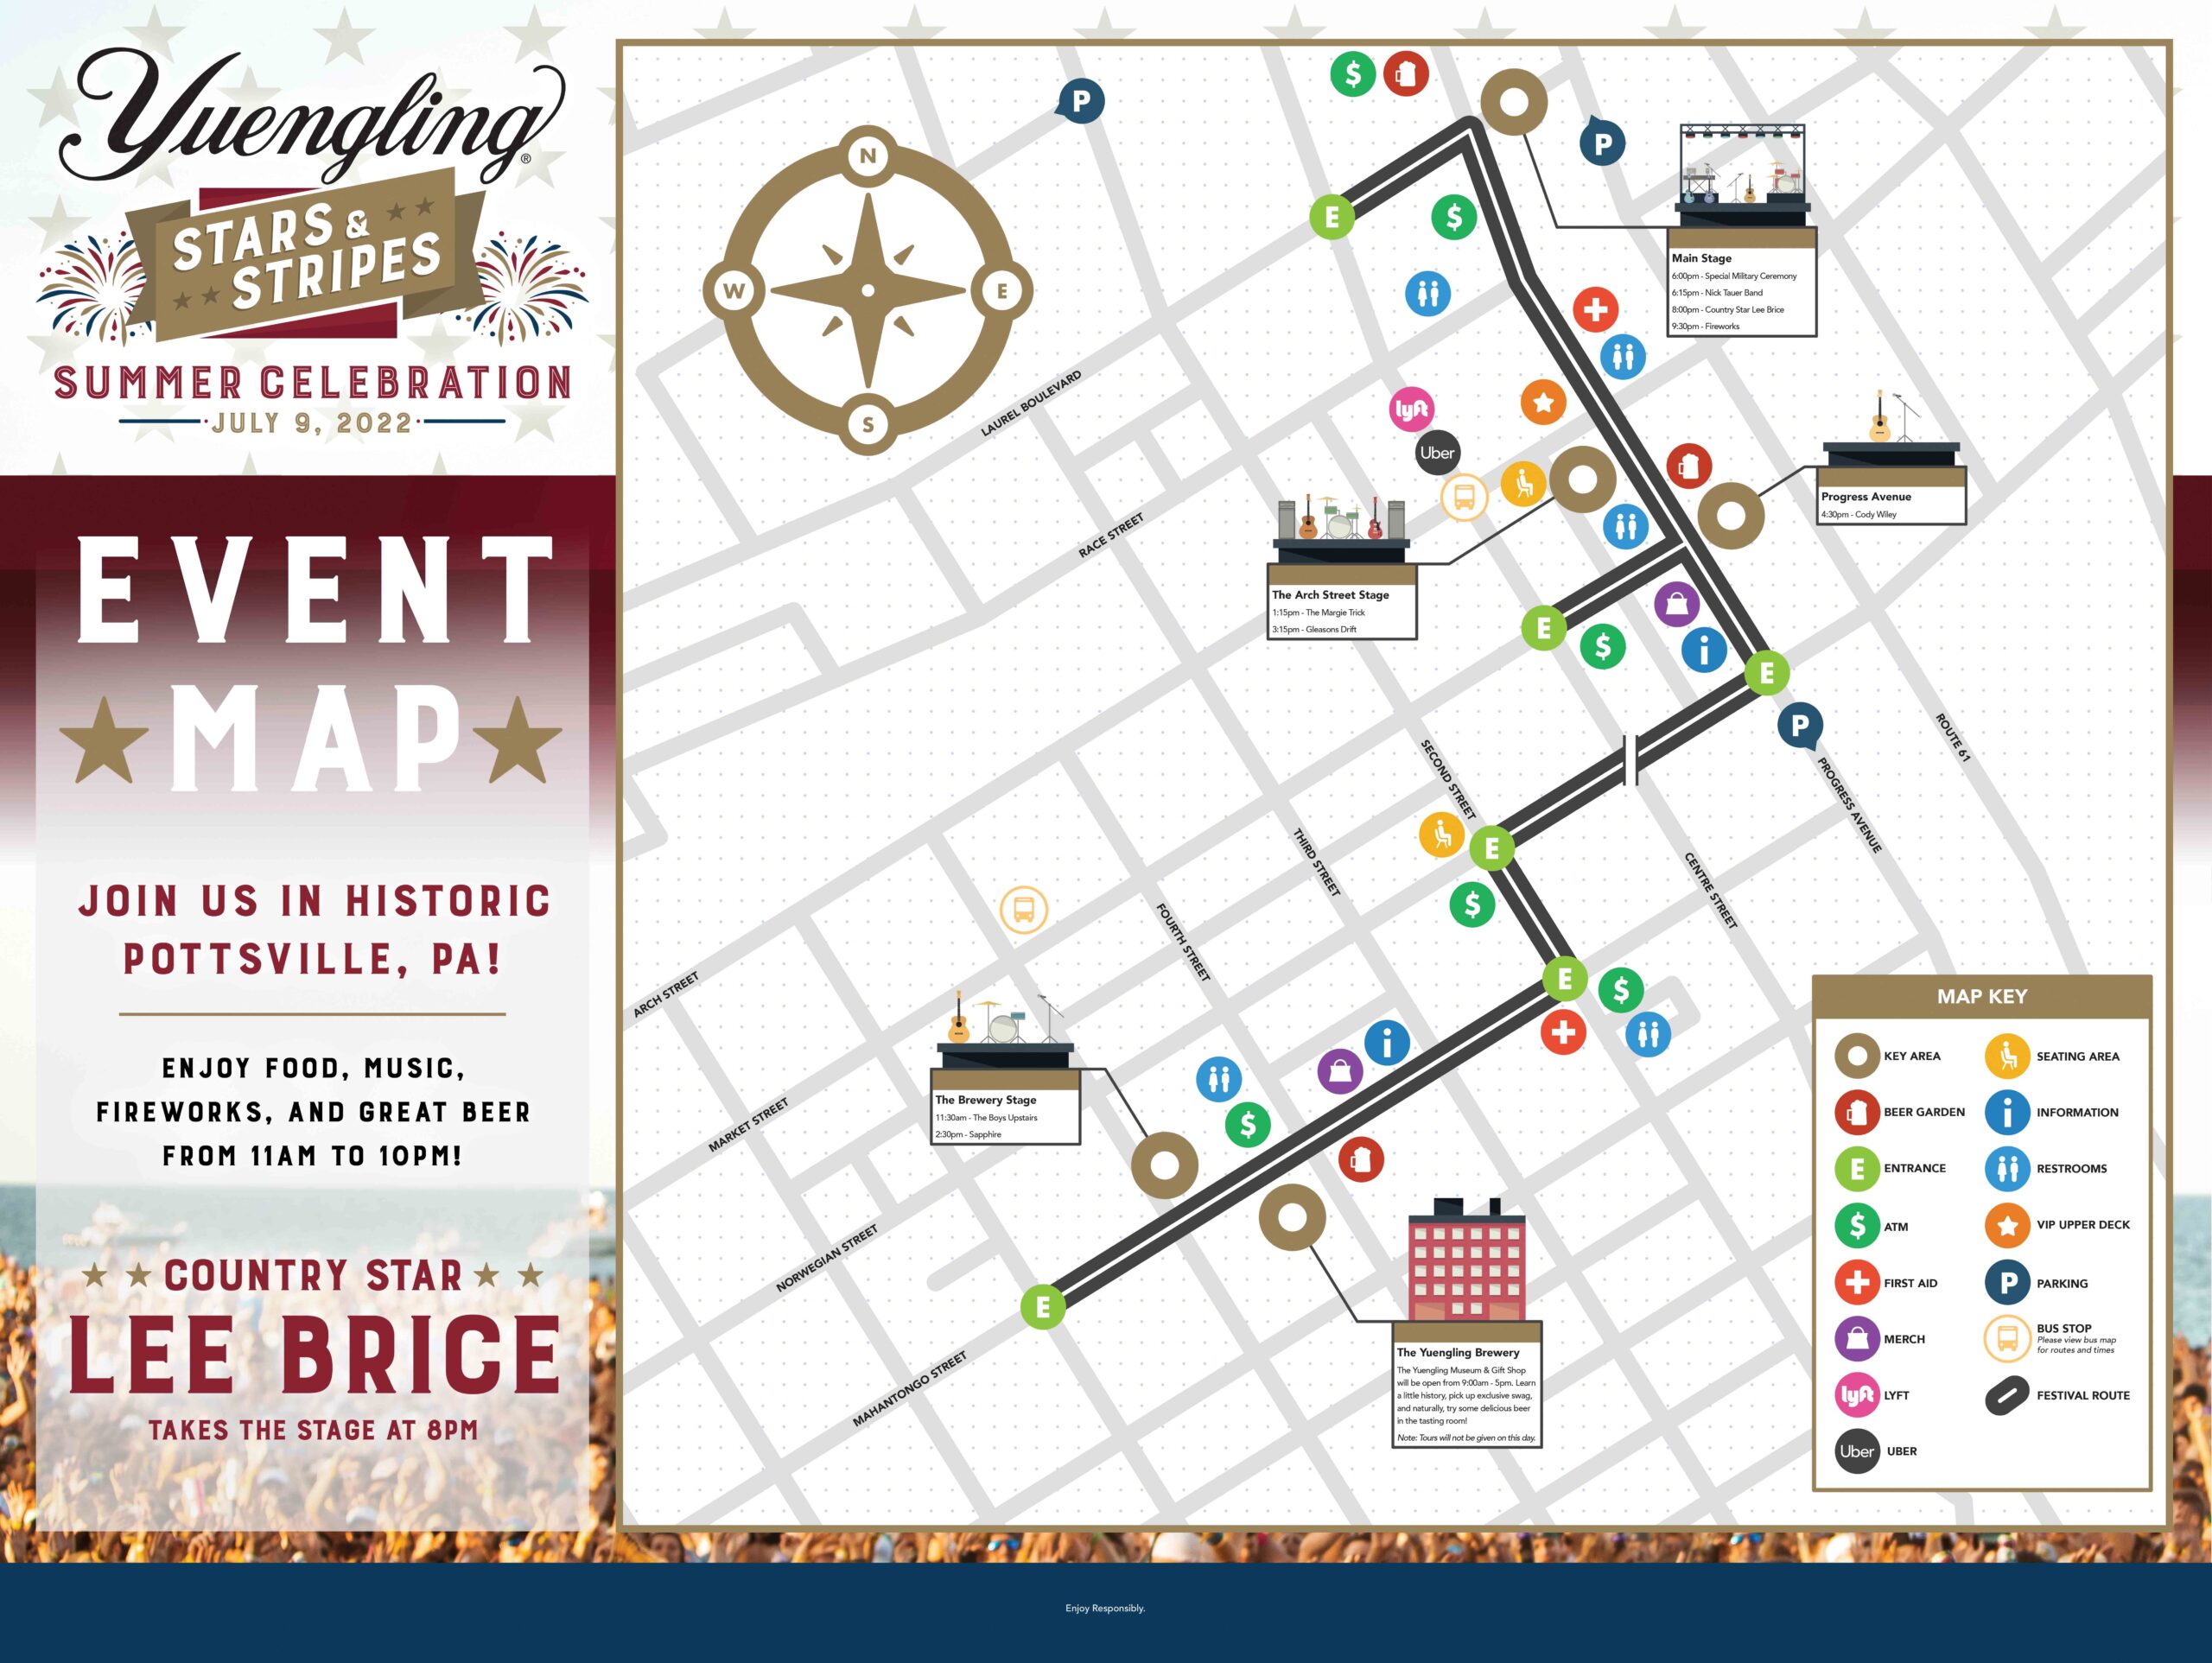 yuengling summer celebration event map